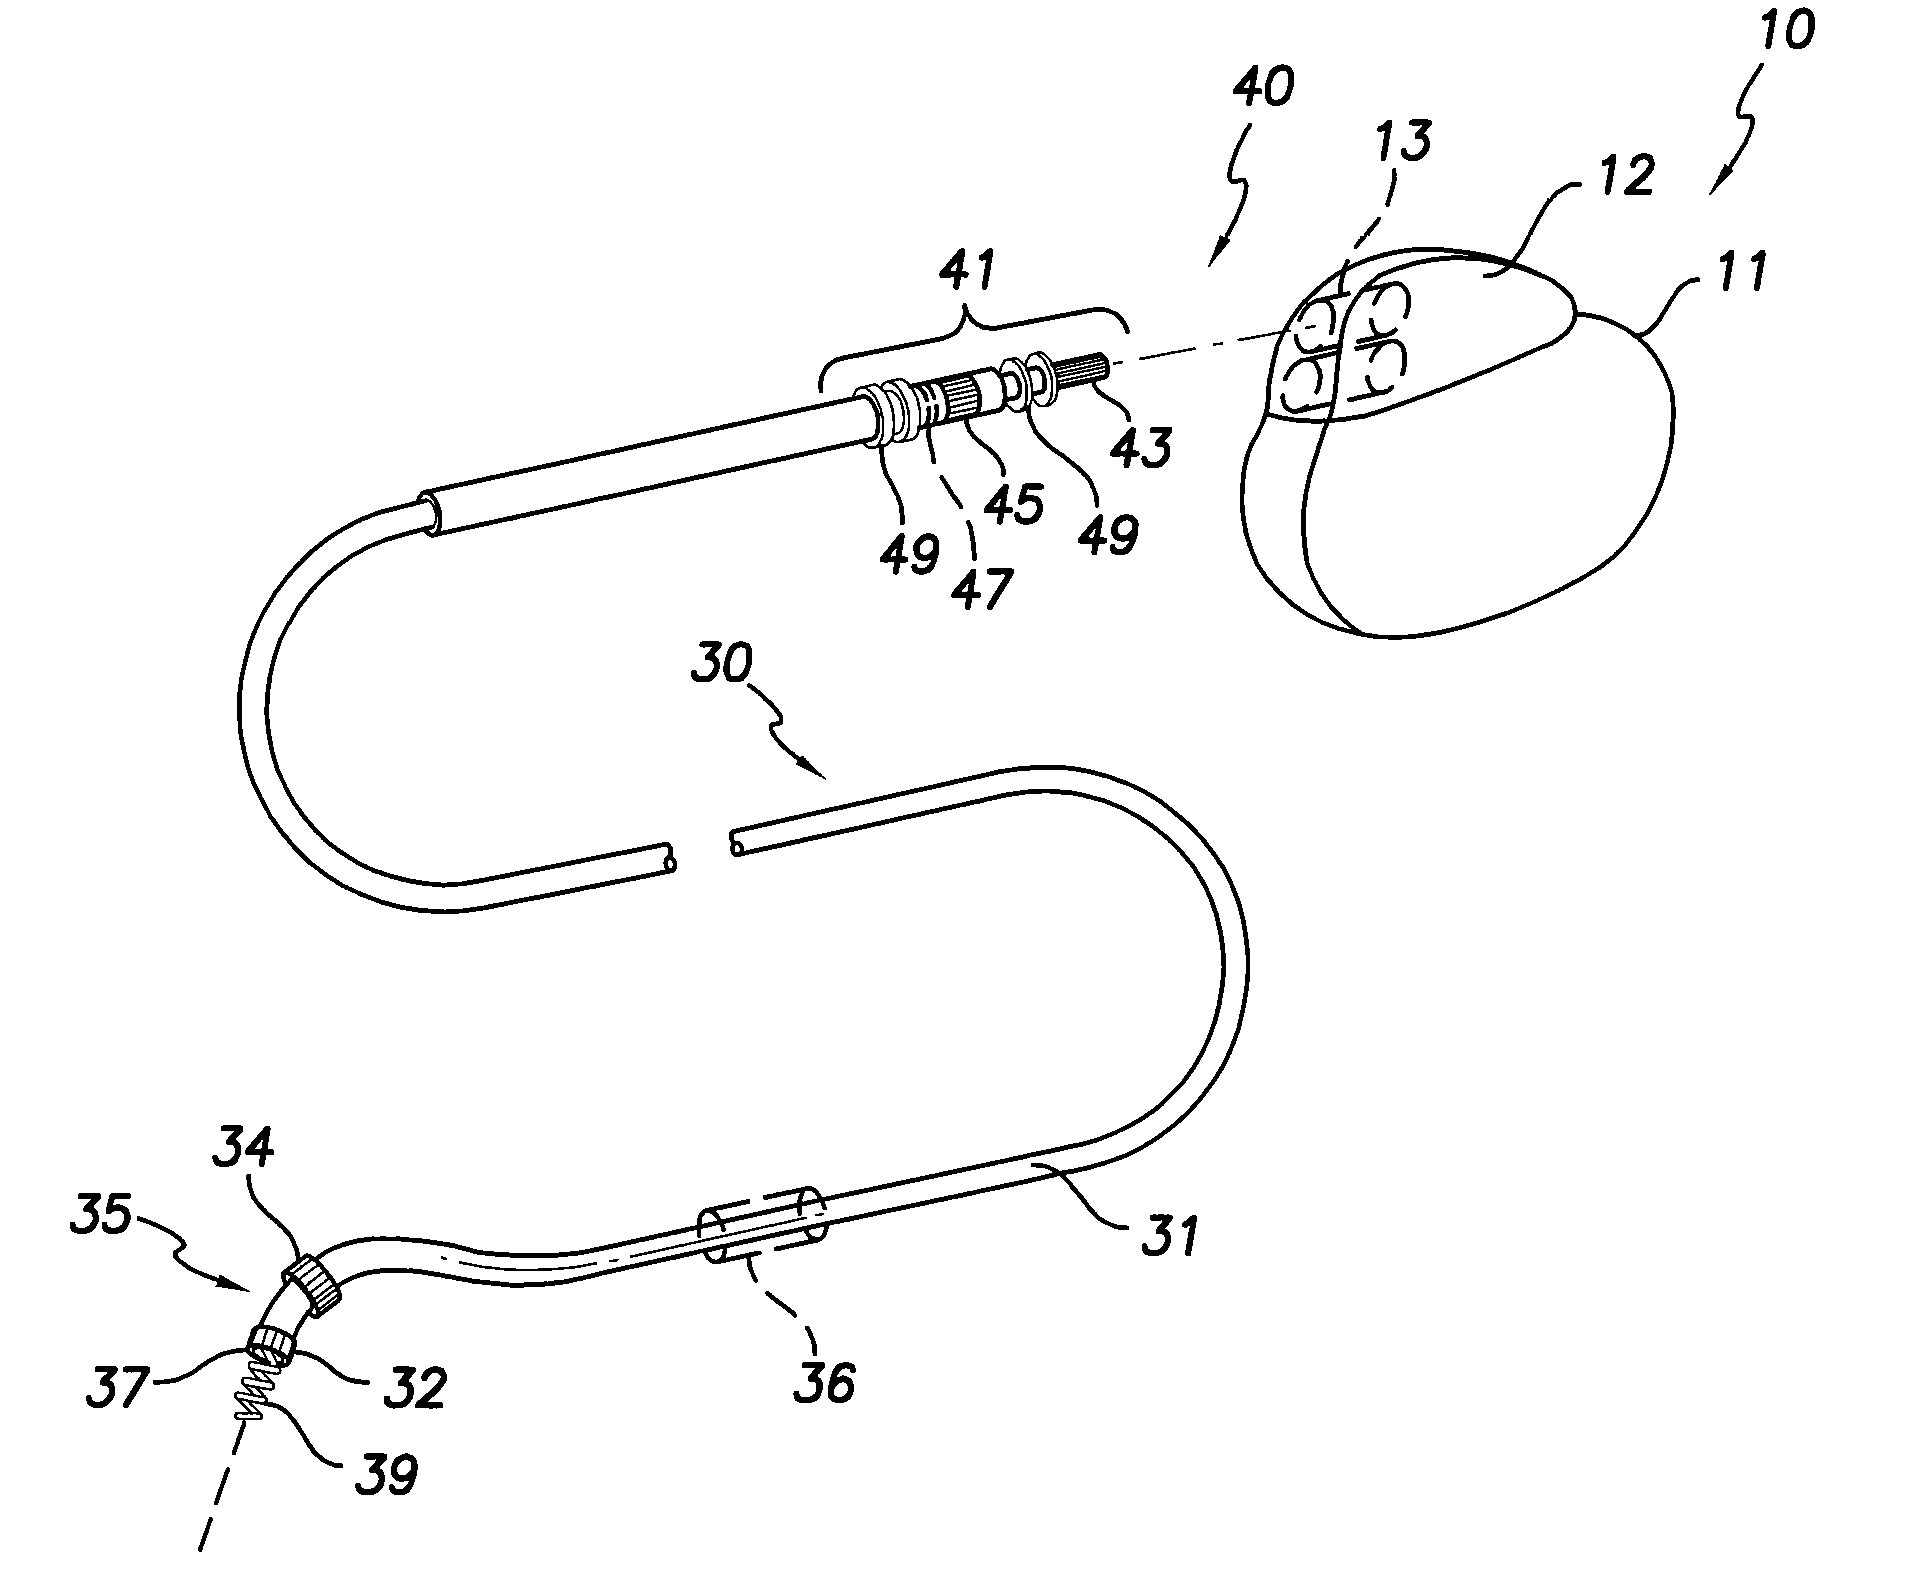 Implantable Medical Lead Circuitry and Methods for Reducing Heating and/or Induced Current